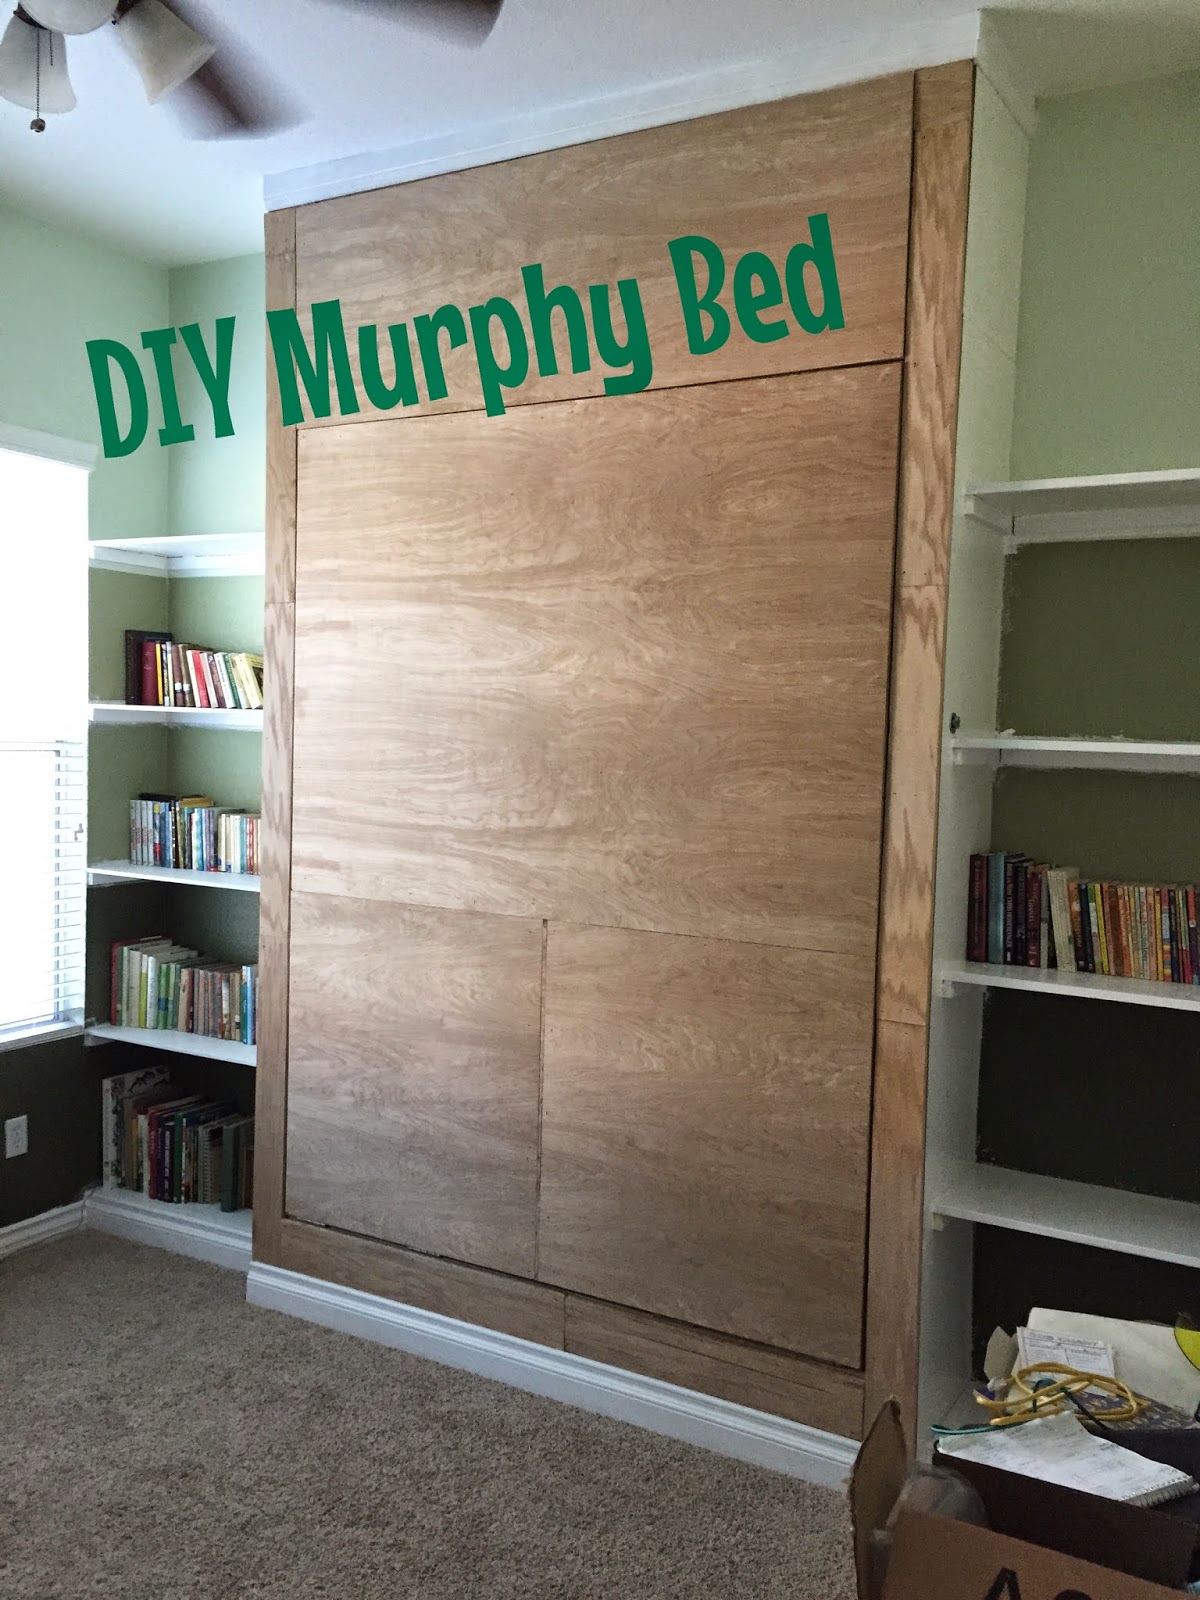 DIY wall bed with a rustic look